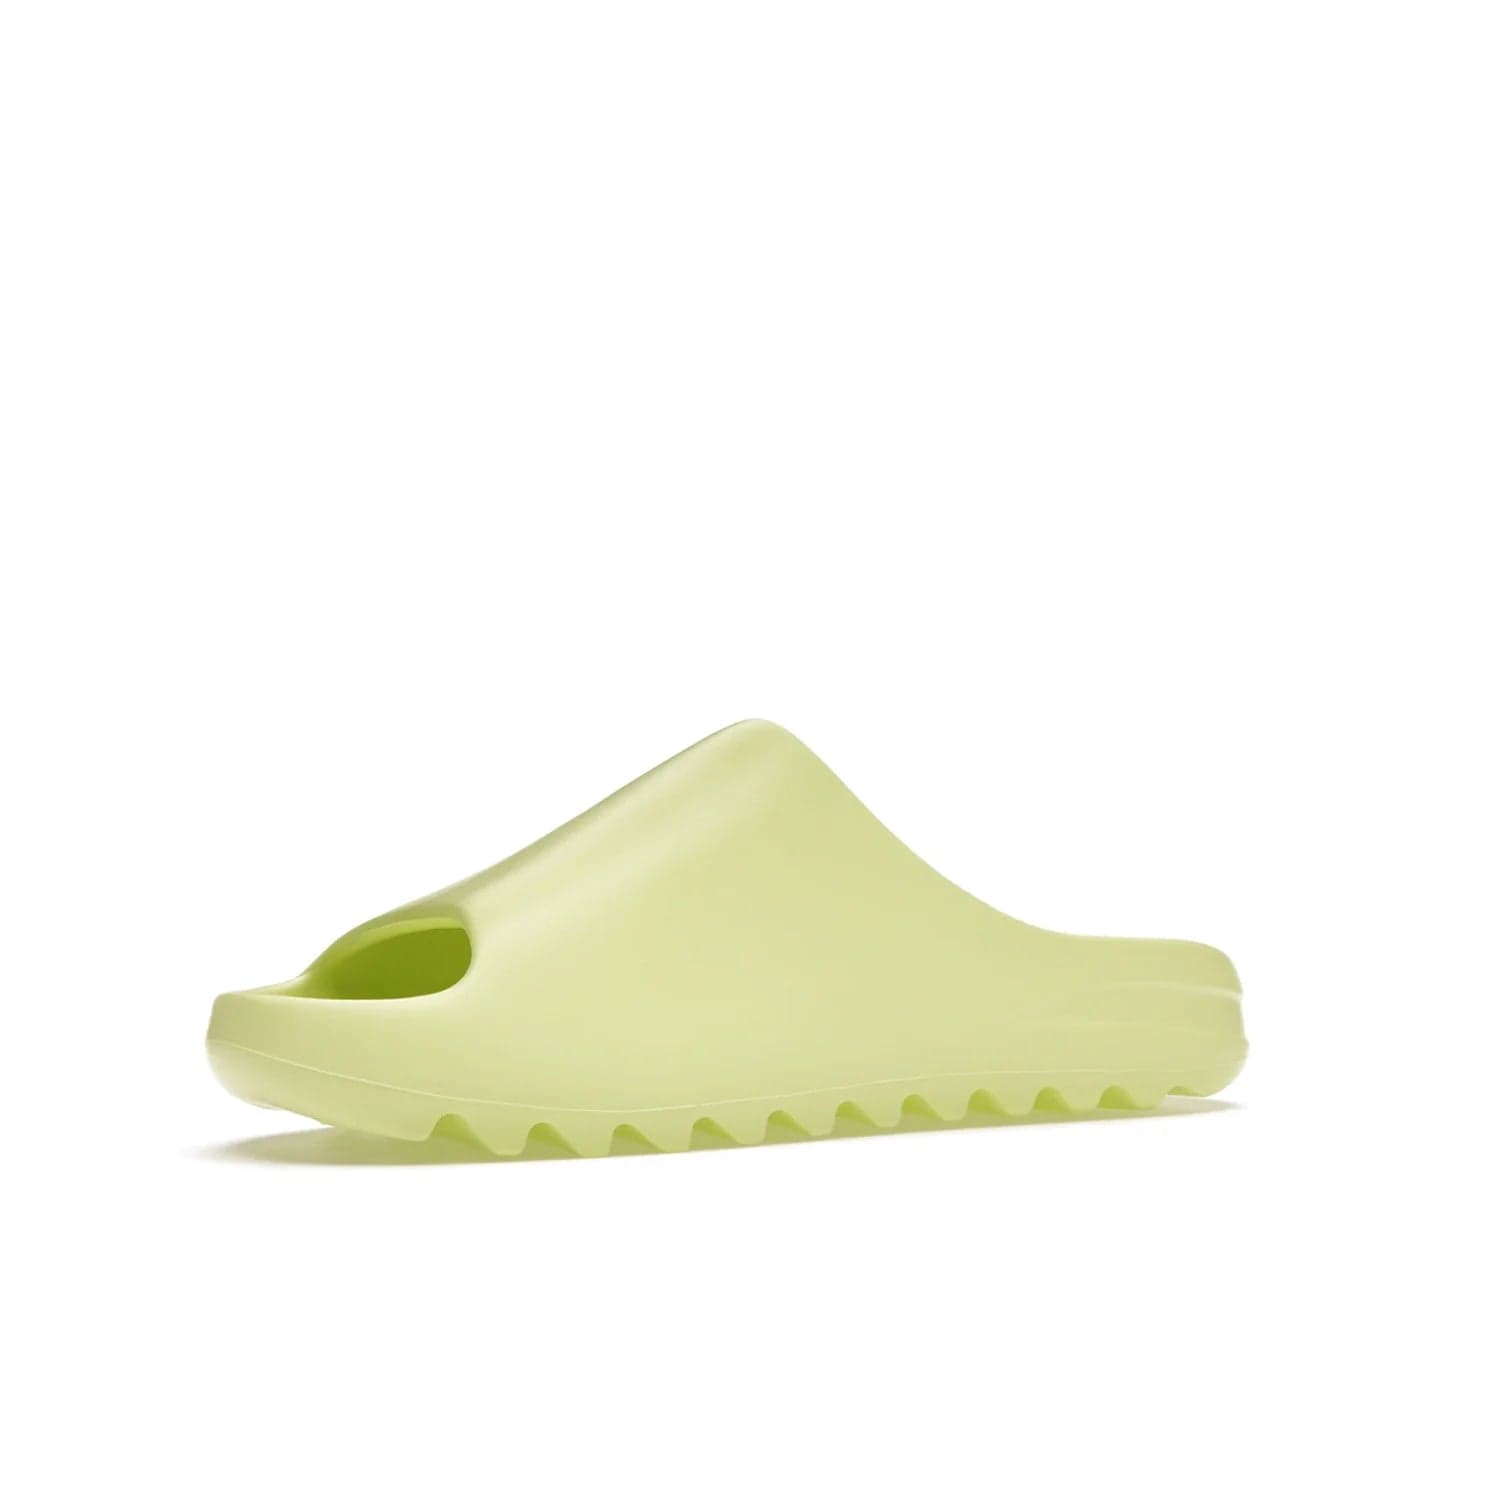 adidas Yeezy Slide Glow Green - Image 16 - Only at www.BallersClubKickz.com - Experience an unexpected summer style with the adidas Yeezy Slide Glow Green. This limited edition slide sandal provides a lightweight and durable construction and a bold Glow Green hue. Strategic grooves enhance traction and provide all-day comfort. Make a statement with the adidas Yeezy Slide Glow Green.